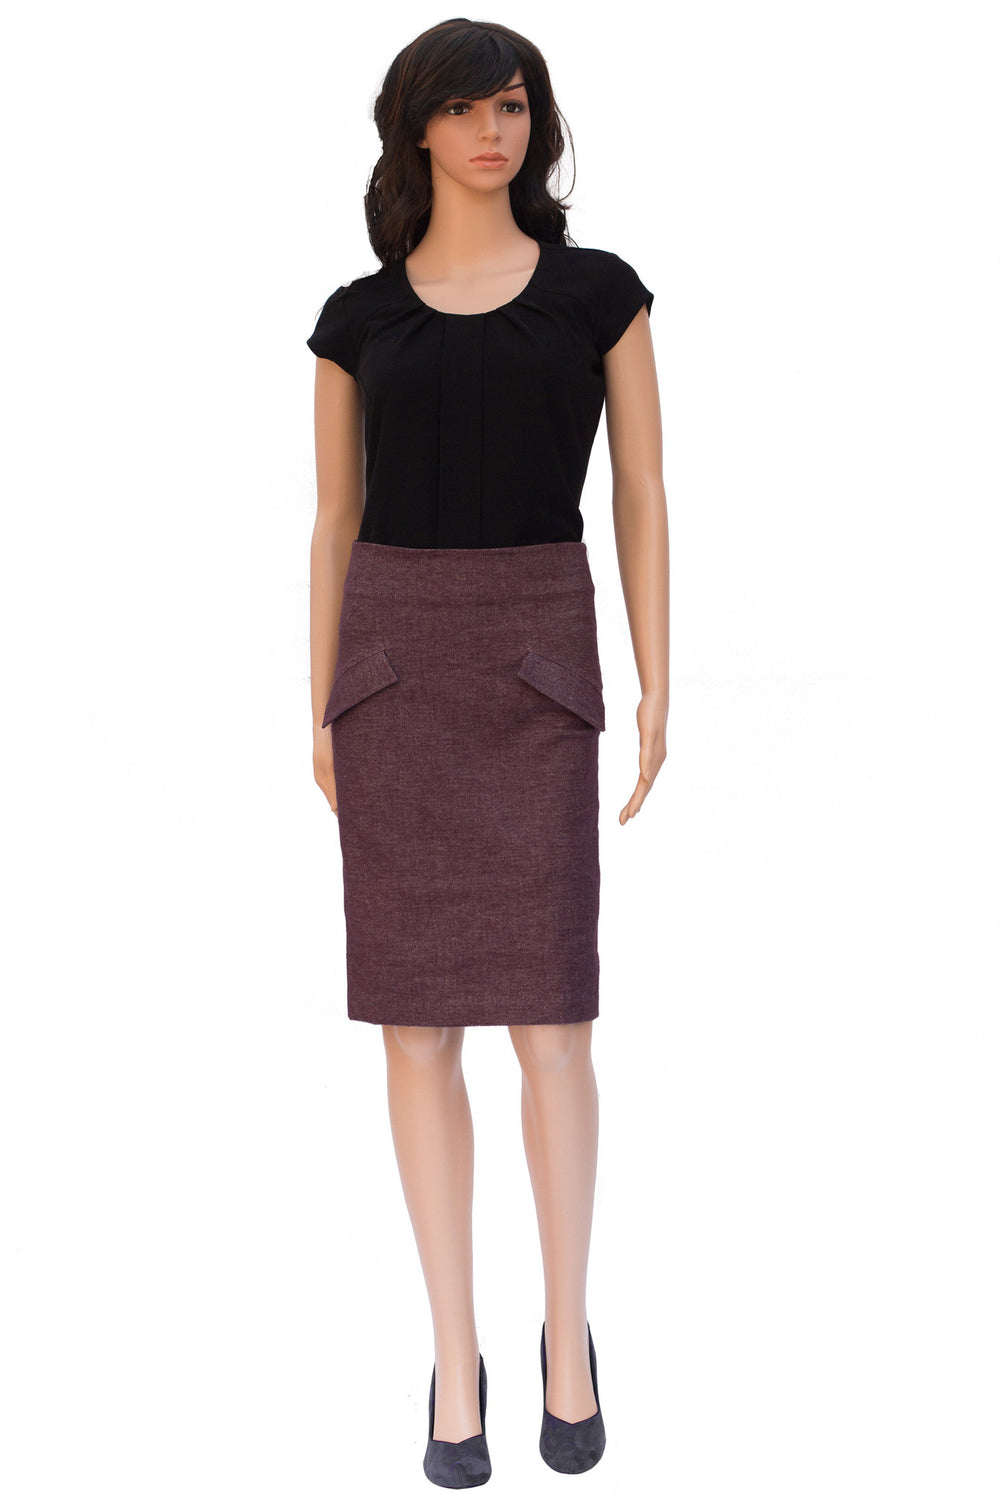 Tapered cotton skirt with pockets for office wear